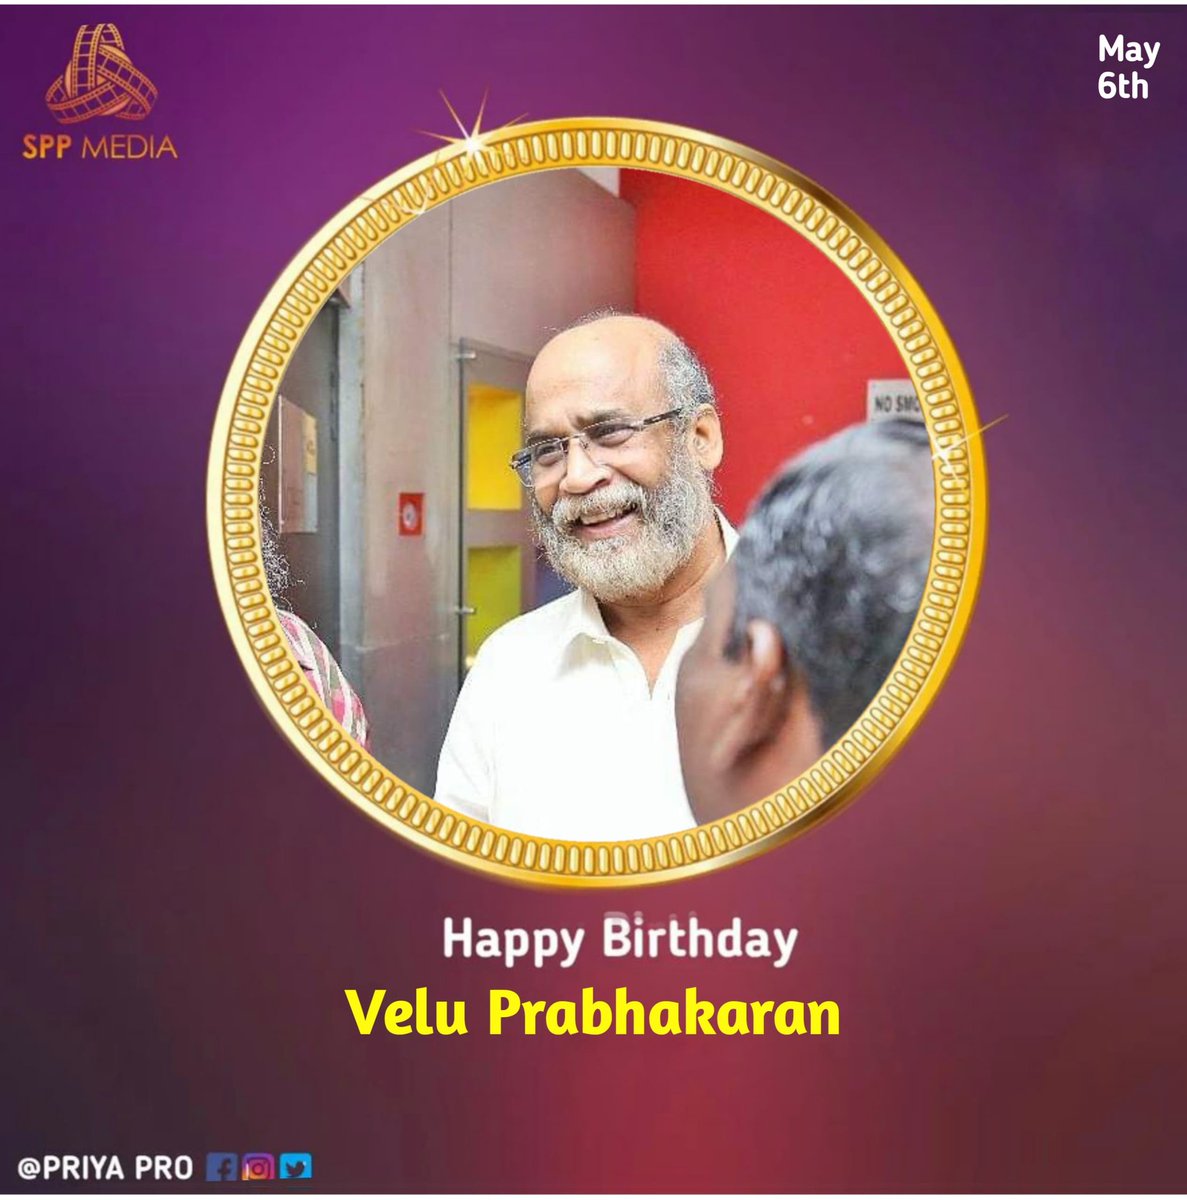 Wishing Ace Film Maker, Actor , Producer #VeluPrabhakaran Sir, A Very Happy Birthday. Wishes From Team @spp_media @PRO_Priya #HappyBirthdayVeluPrabhakaran #HBDVeluPrabhakaran #FilmMaker #Kollywood